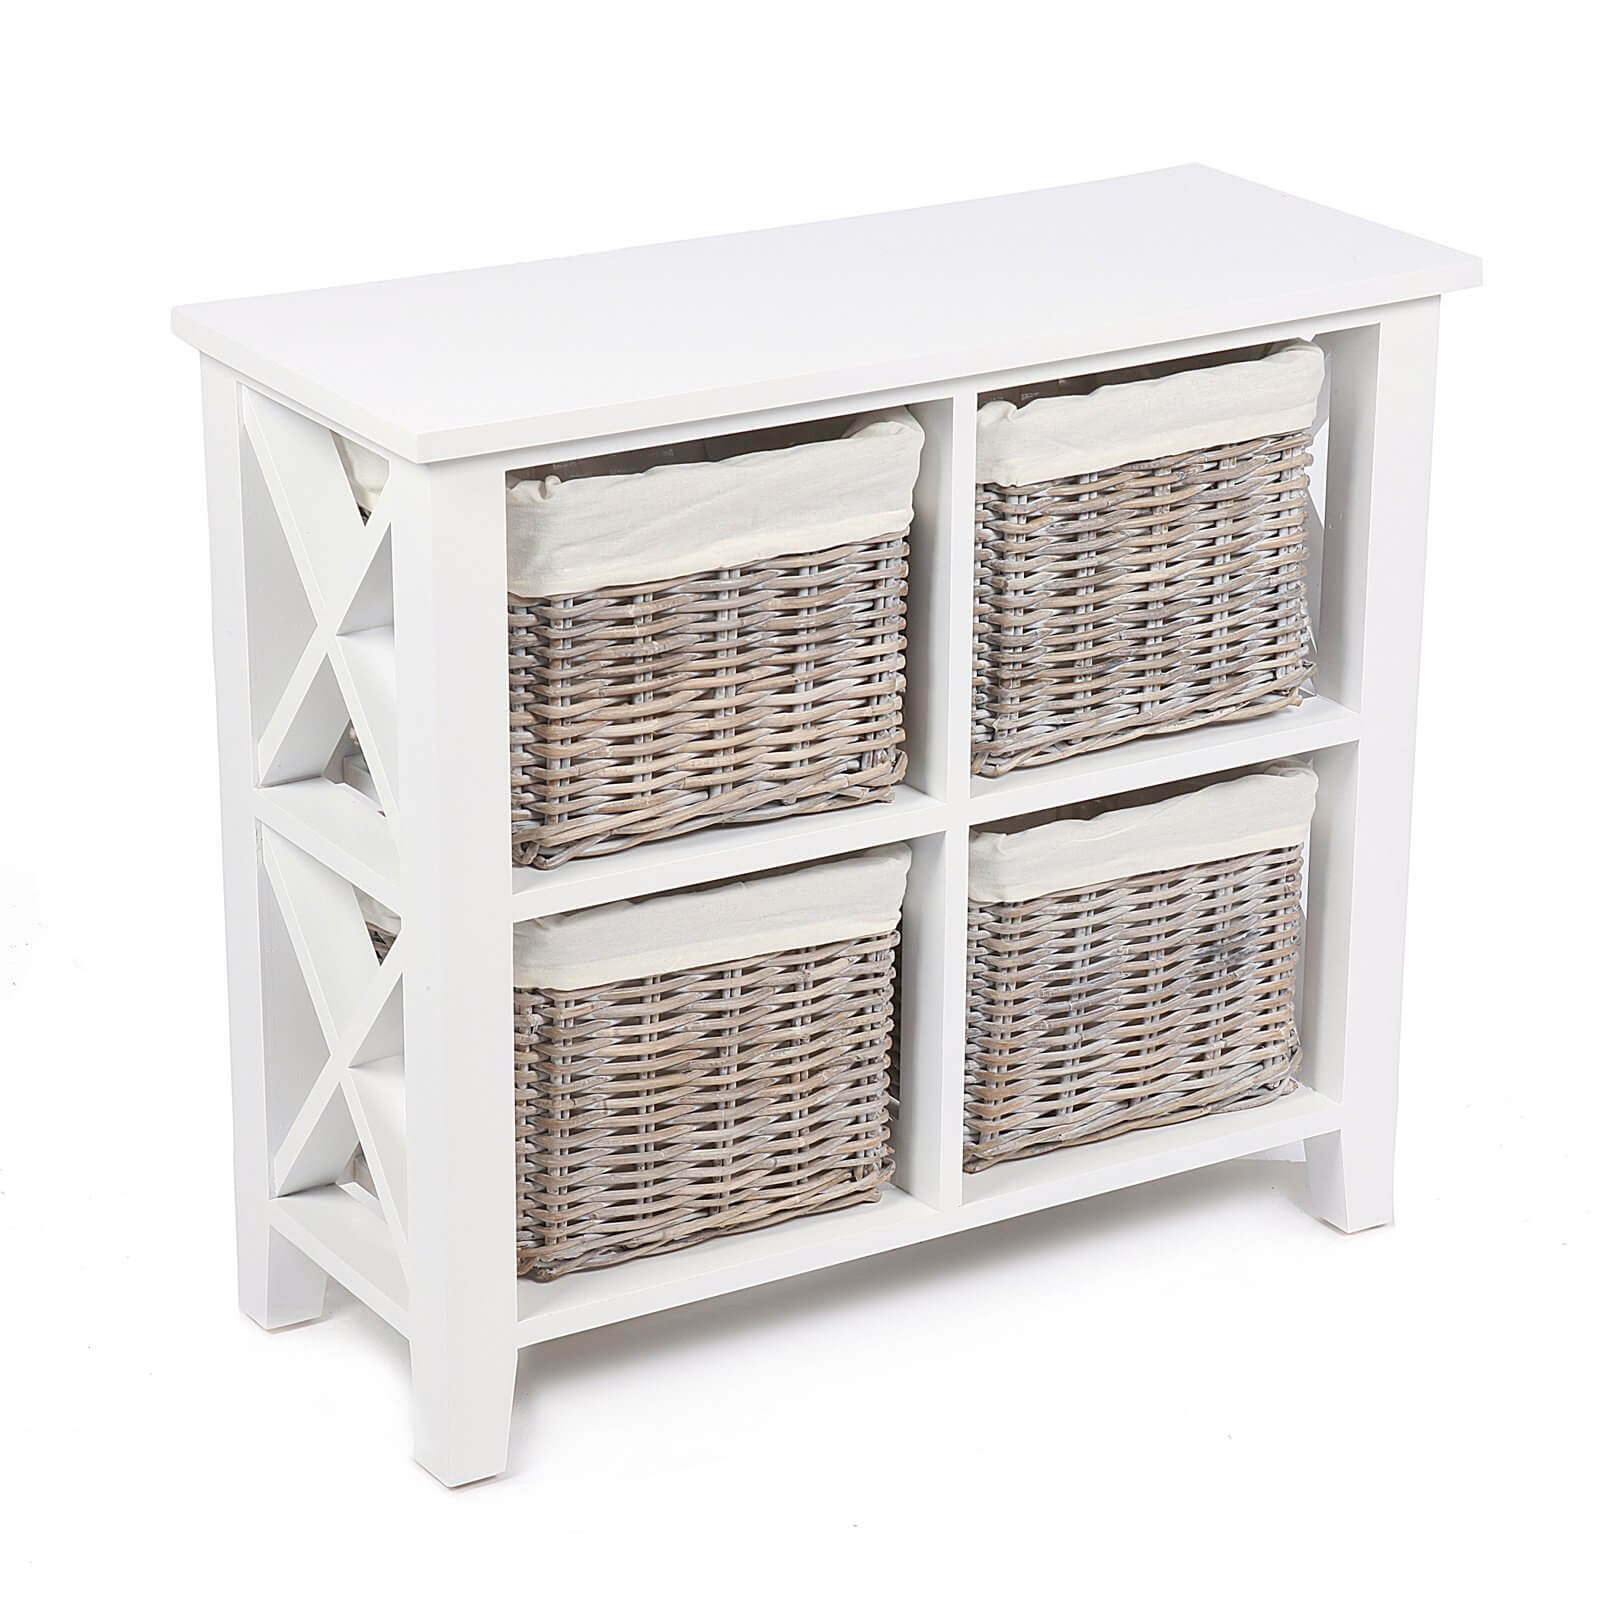 Bude 4 Wicker Baskets Square Cabinet